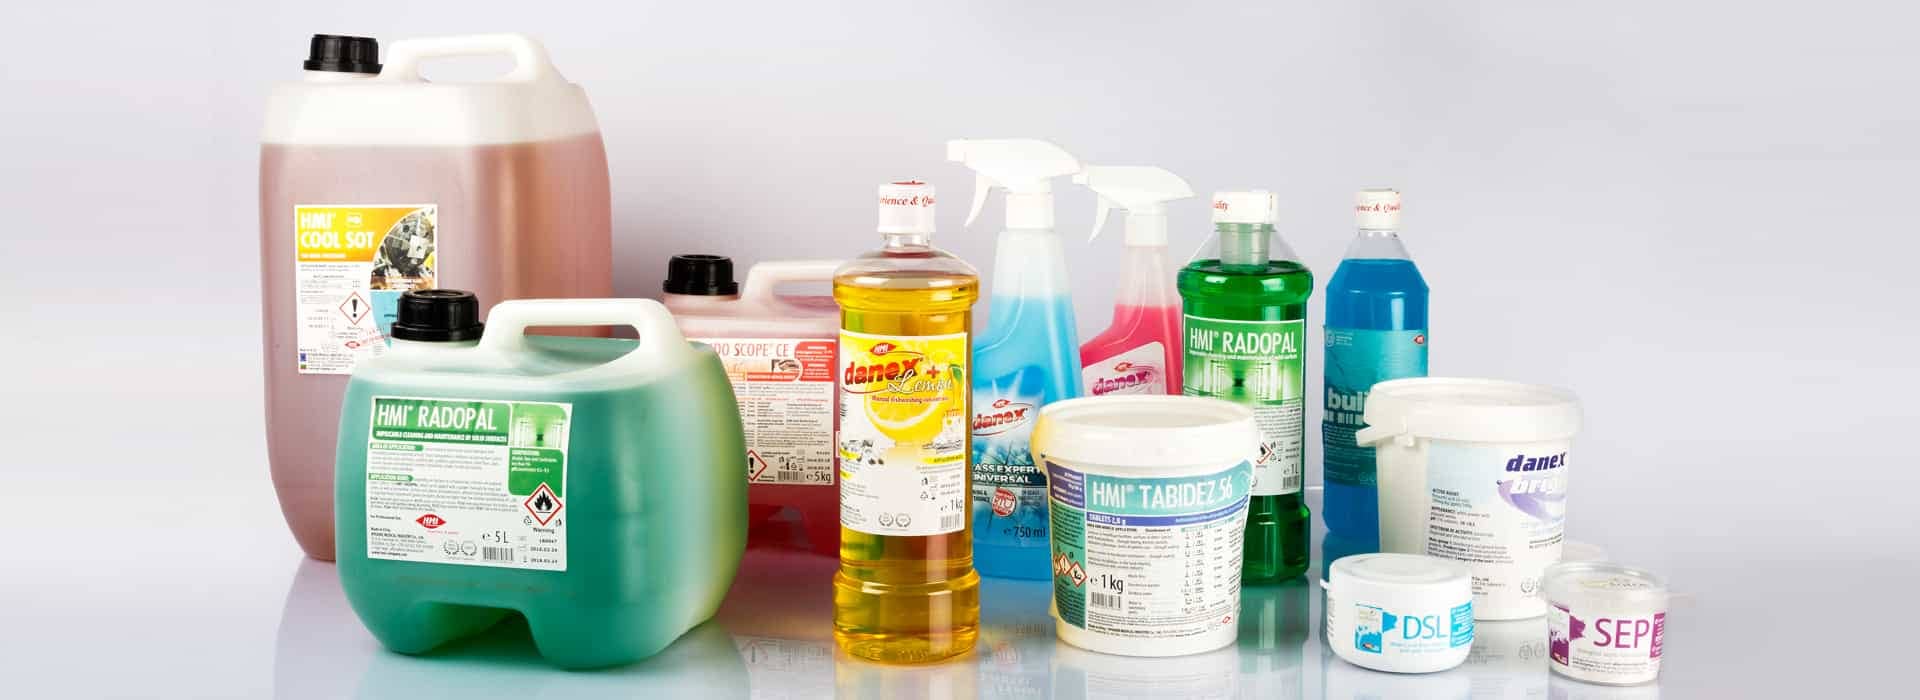 Use Eco-Friendly Cleaning Products - Eco-Friendly Living 